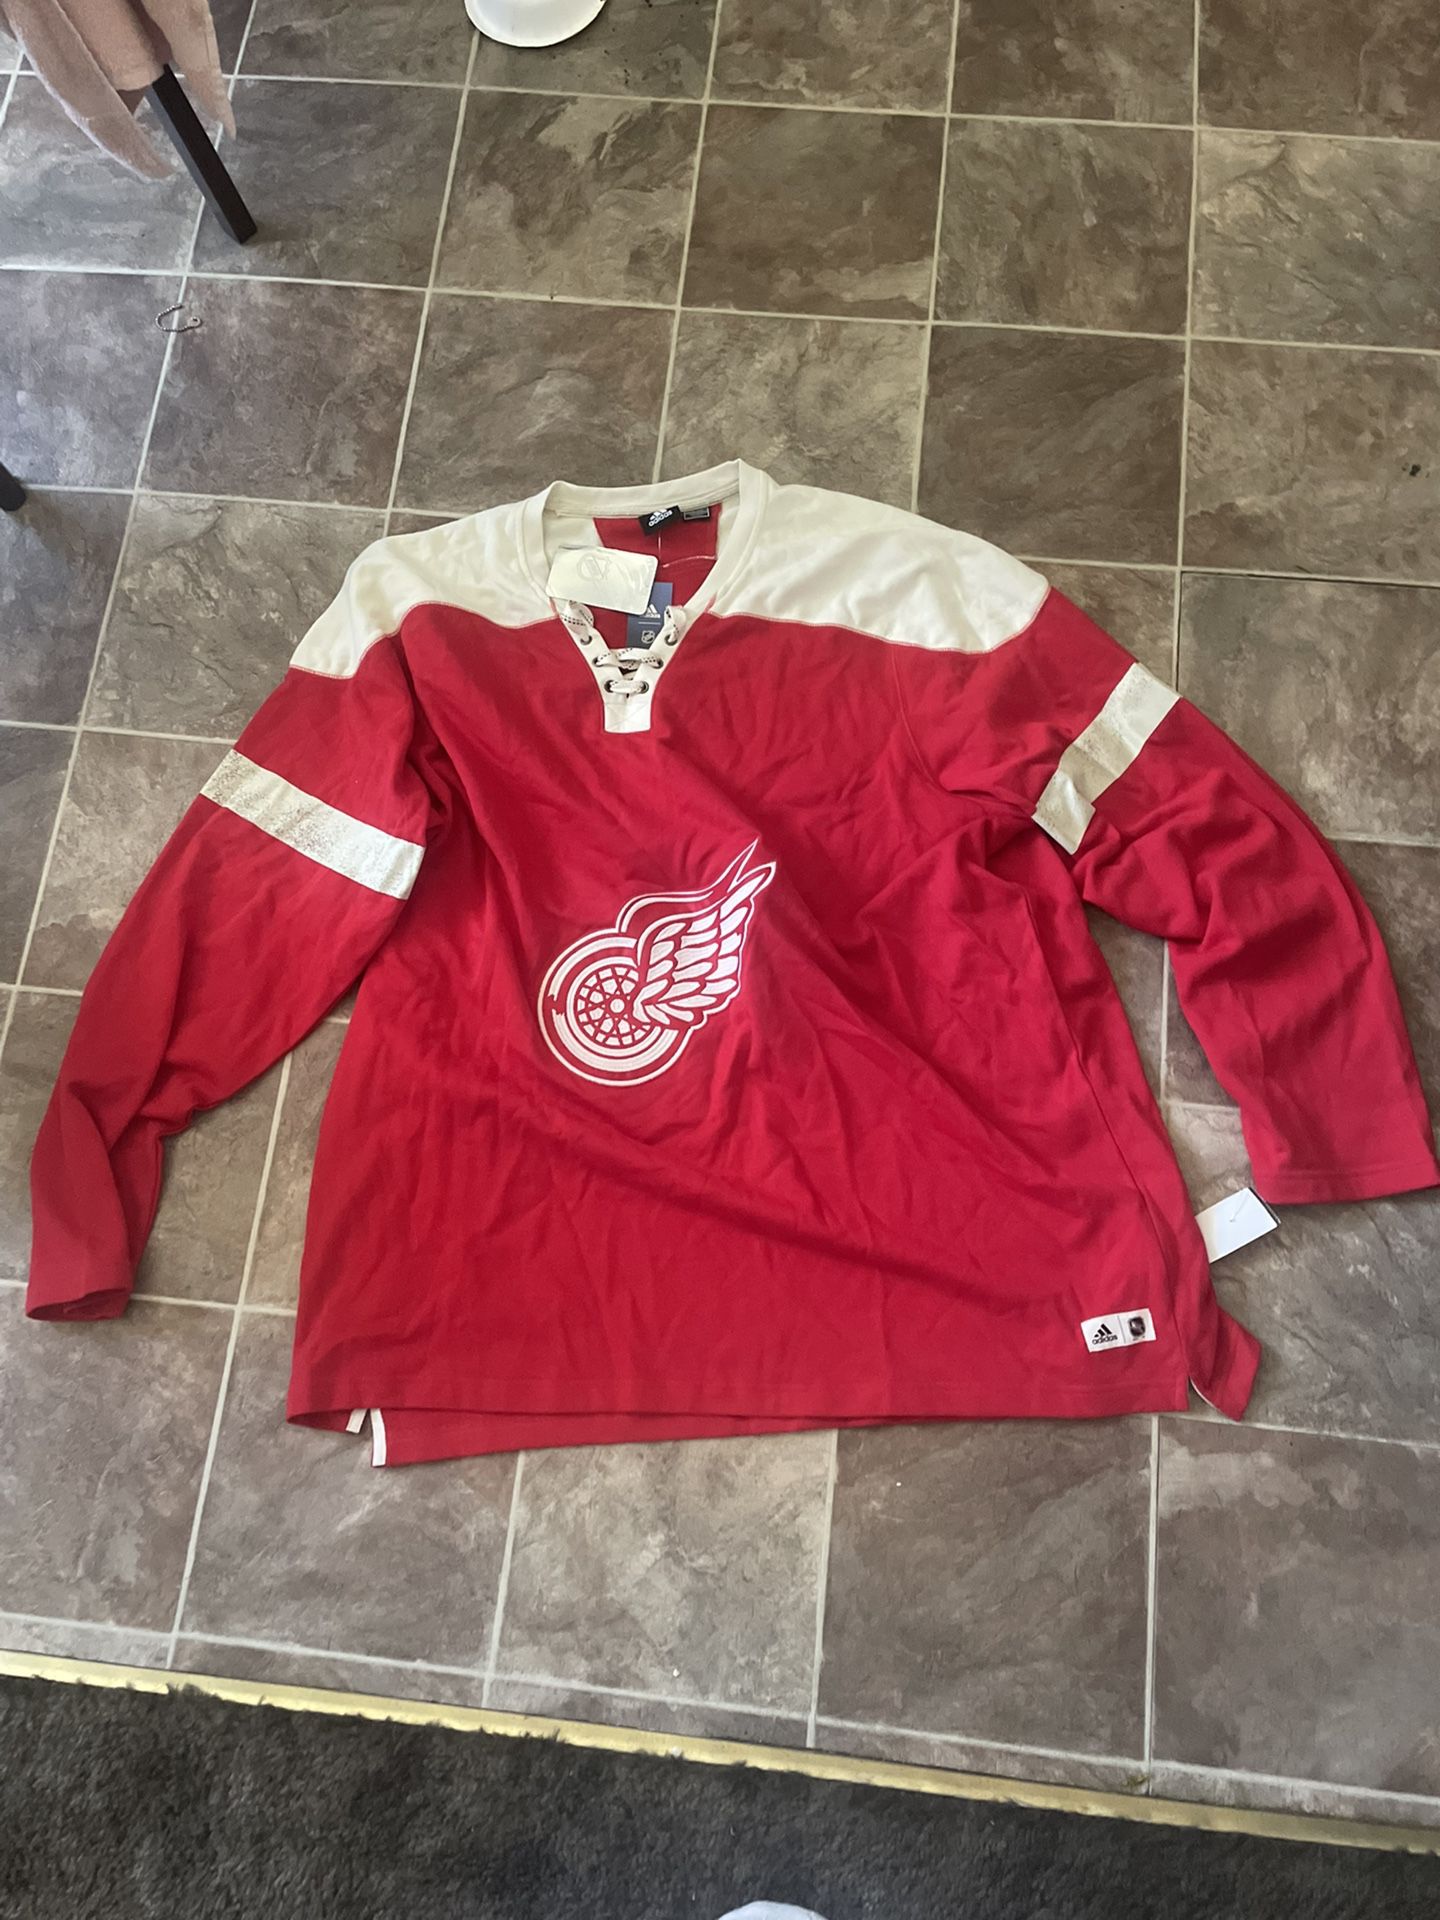 RED WING ADIDAS JERSEY